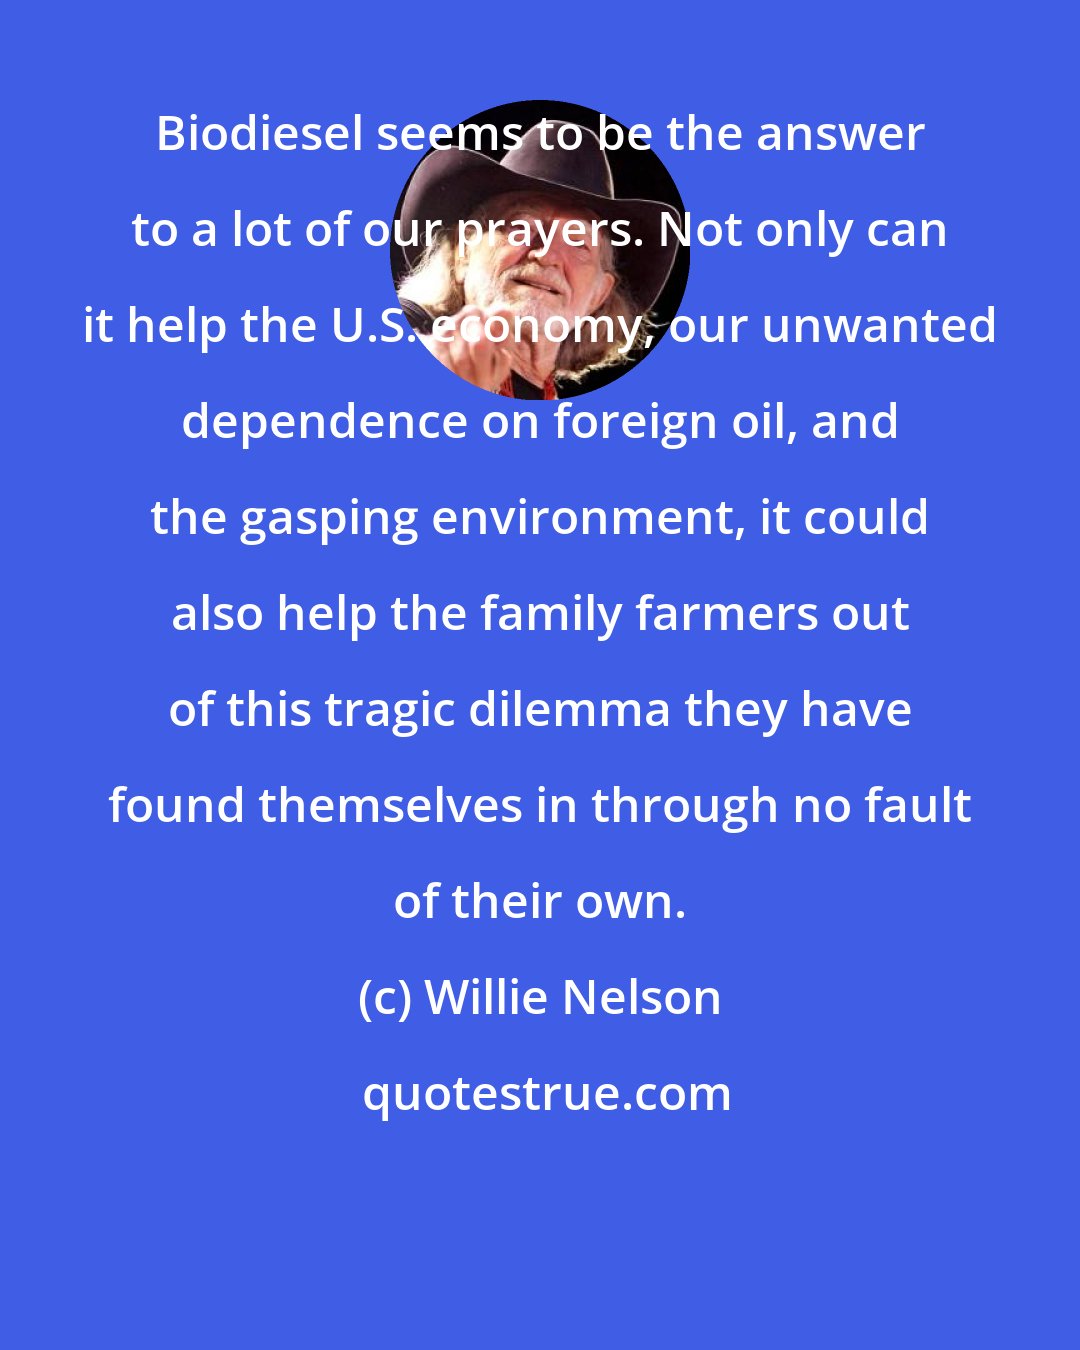 Willie Nelson: Biodiesel seems to be the answer to a lot of our prayers. Not only can it help the U.S. economy, our unwanted dependence on foreign oil, and the gasping environment, it could also help the family farmers out of this tragic dilemma they have found themselves in through no fault of their own.